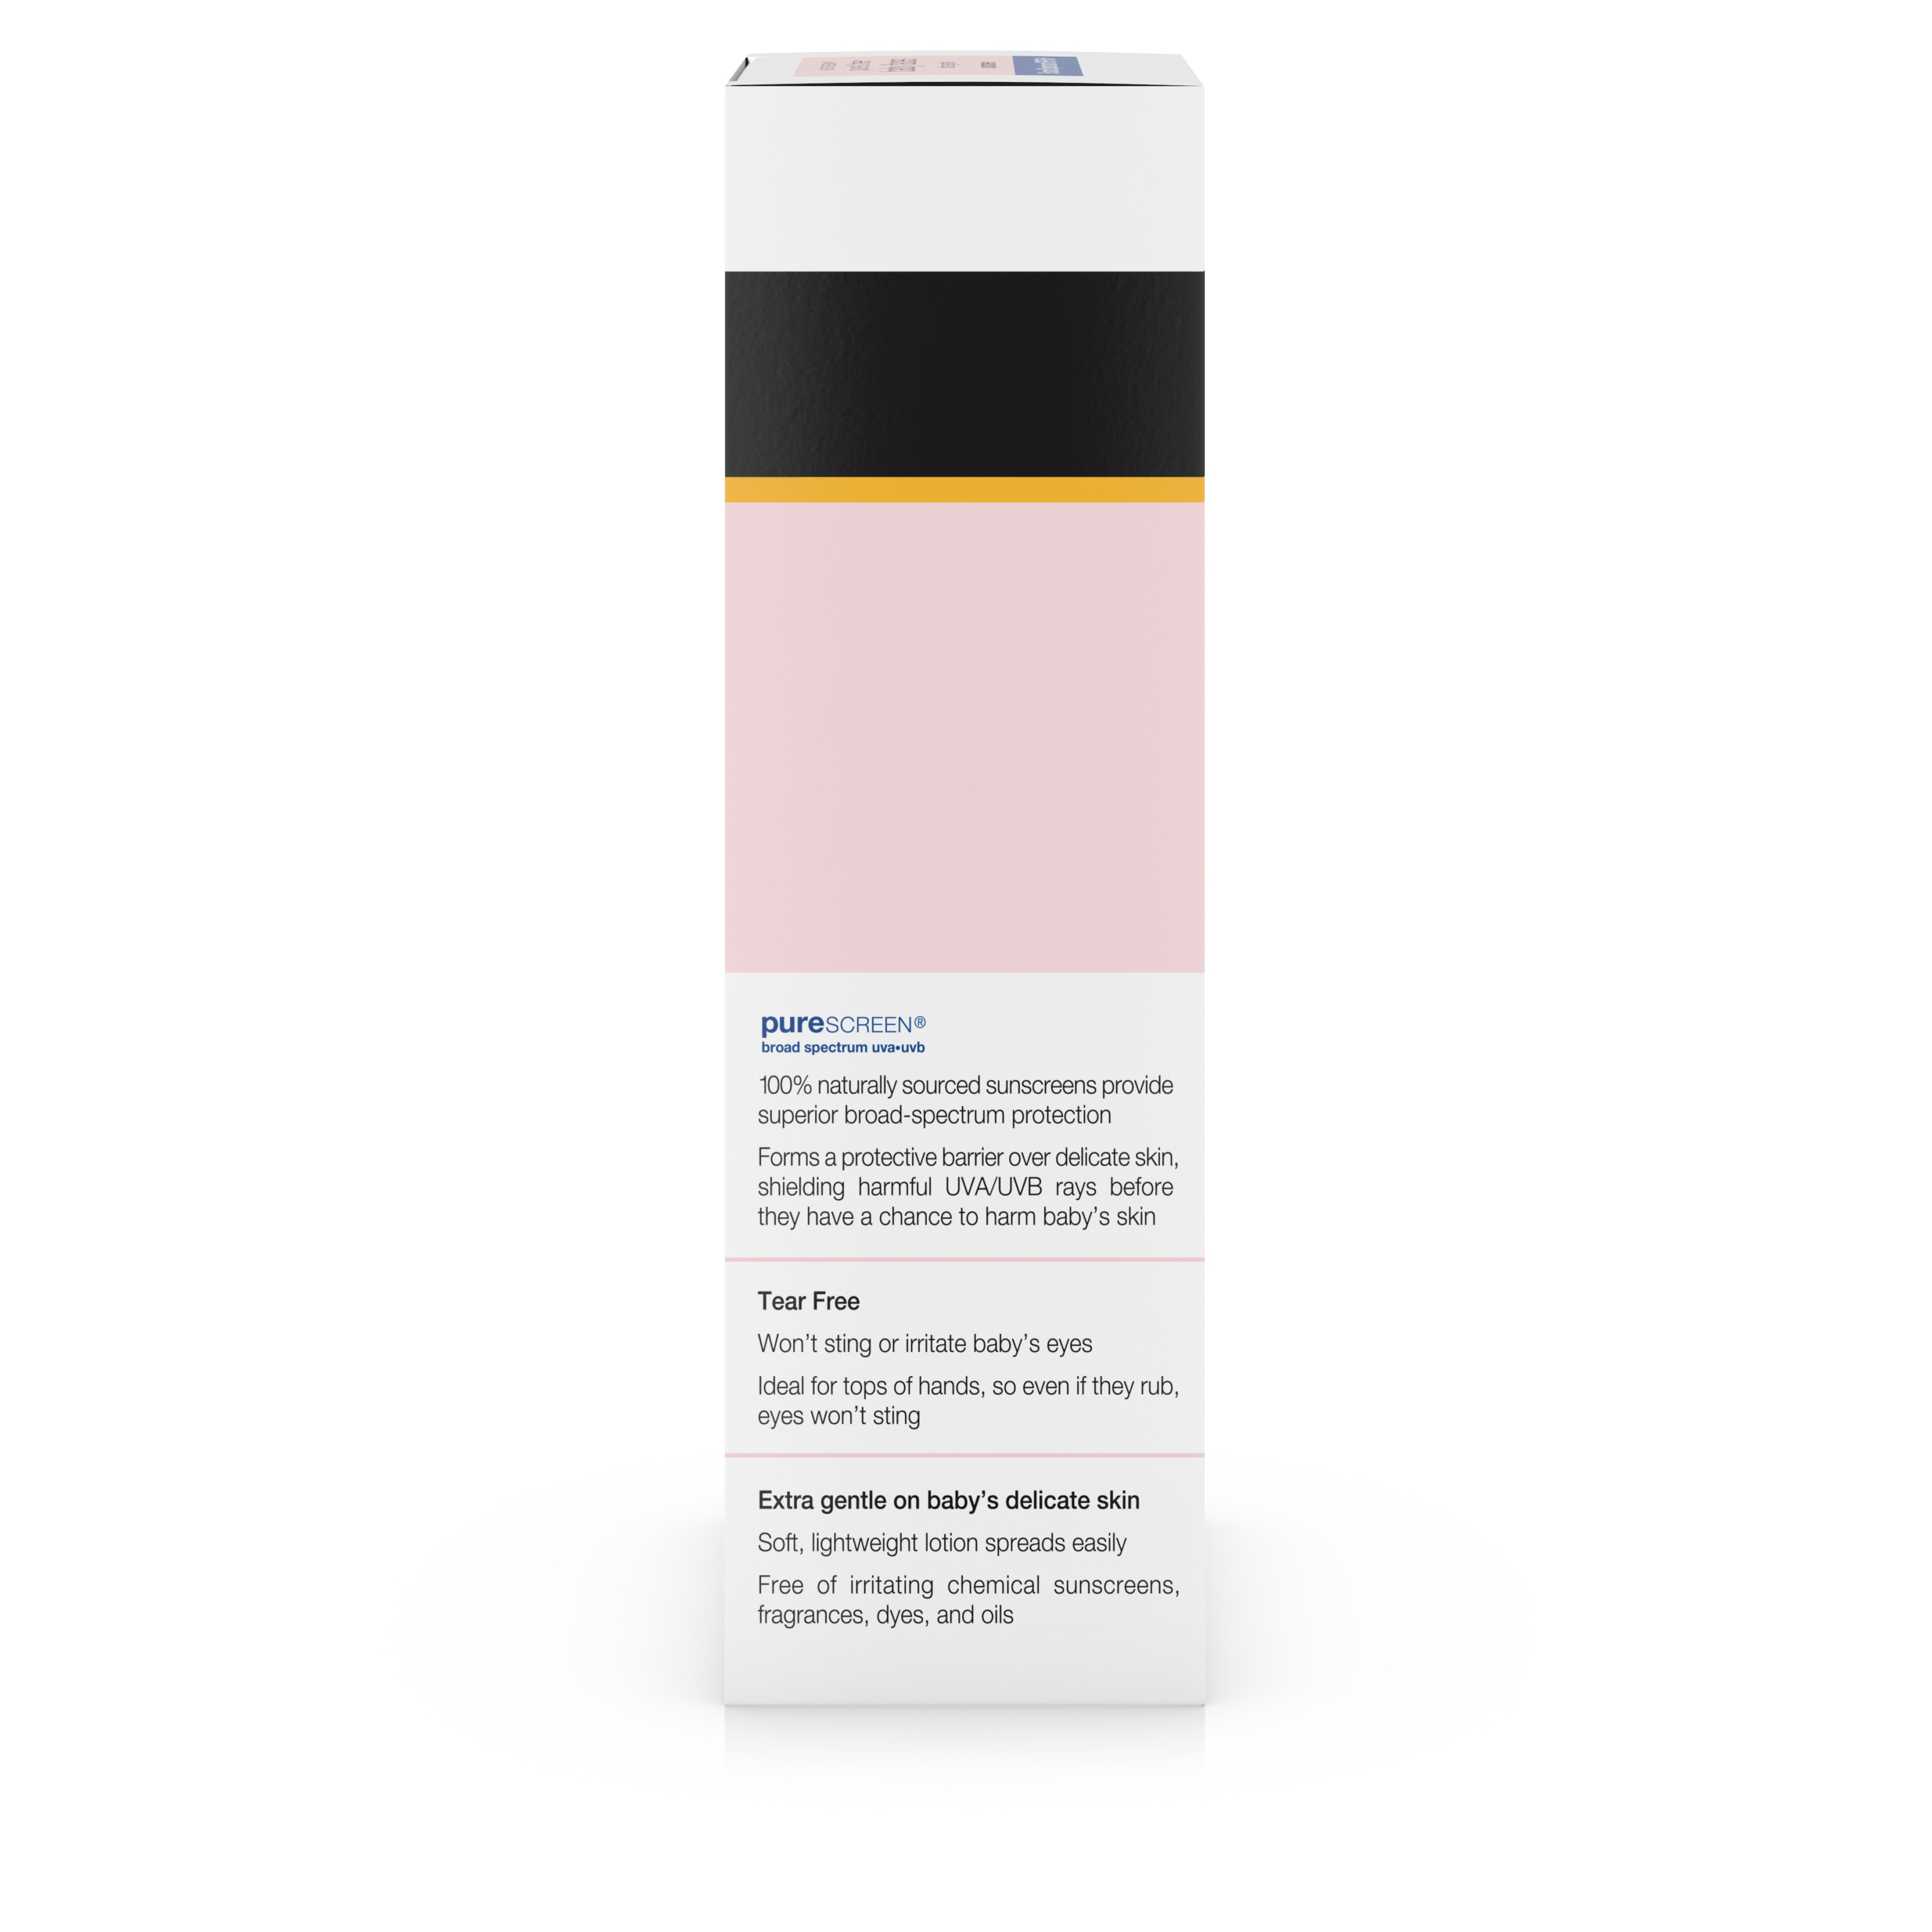 Neutrogena Pure & Free Baby Faces Ultra Gentle Sunscreen Broad Spectrum SPF 45+, 2.5 Oz - image 3 of 6